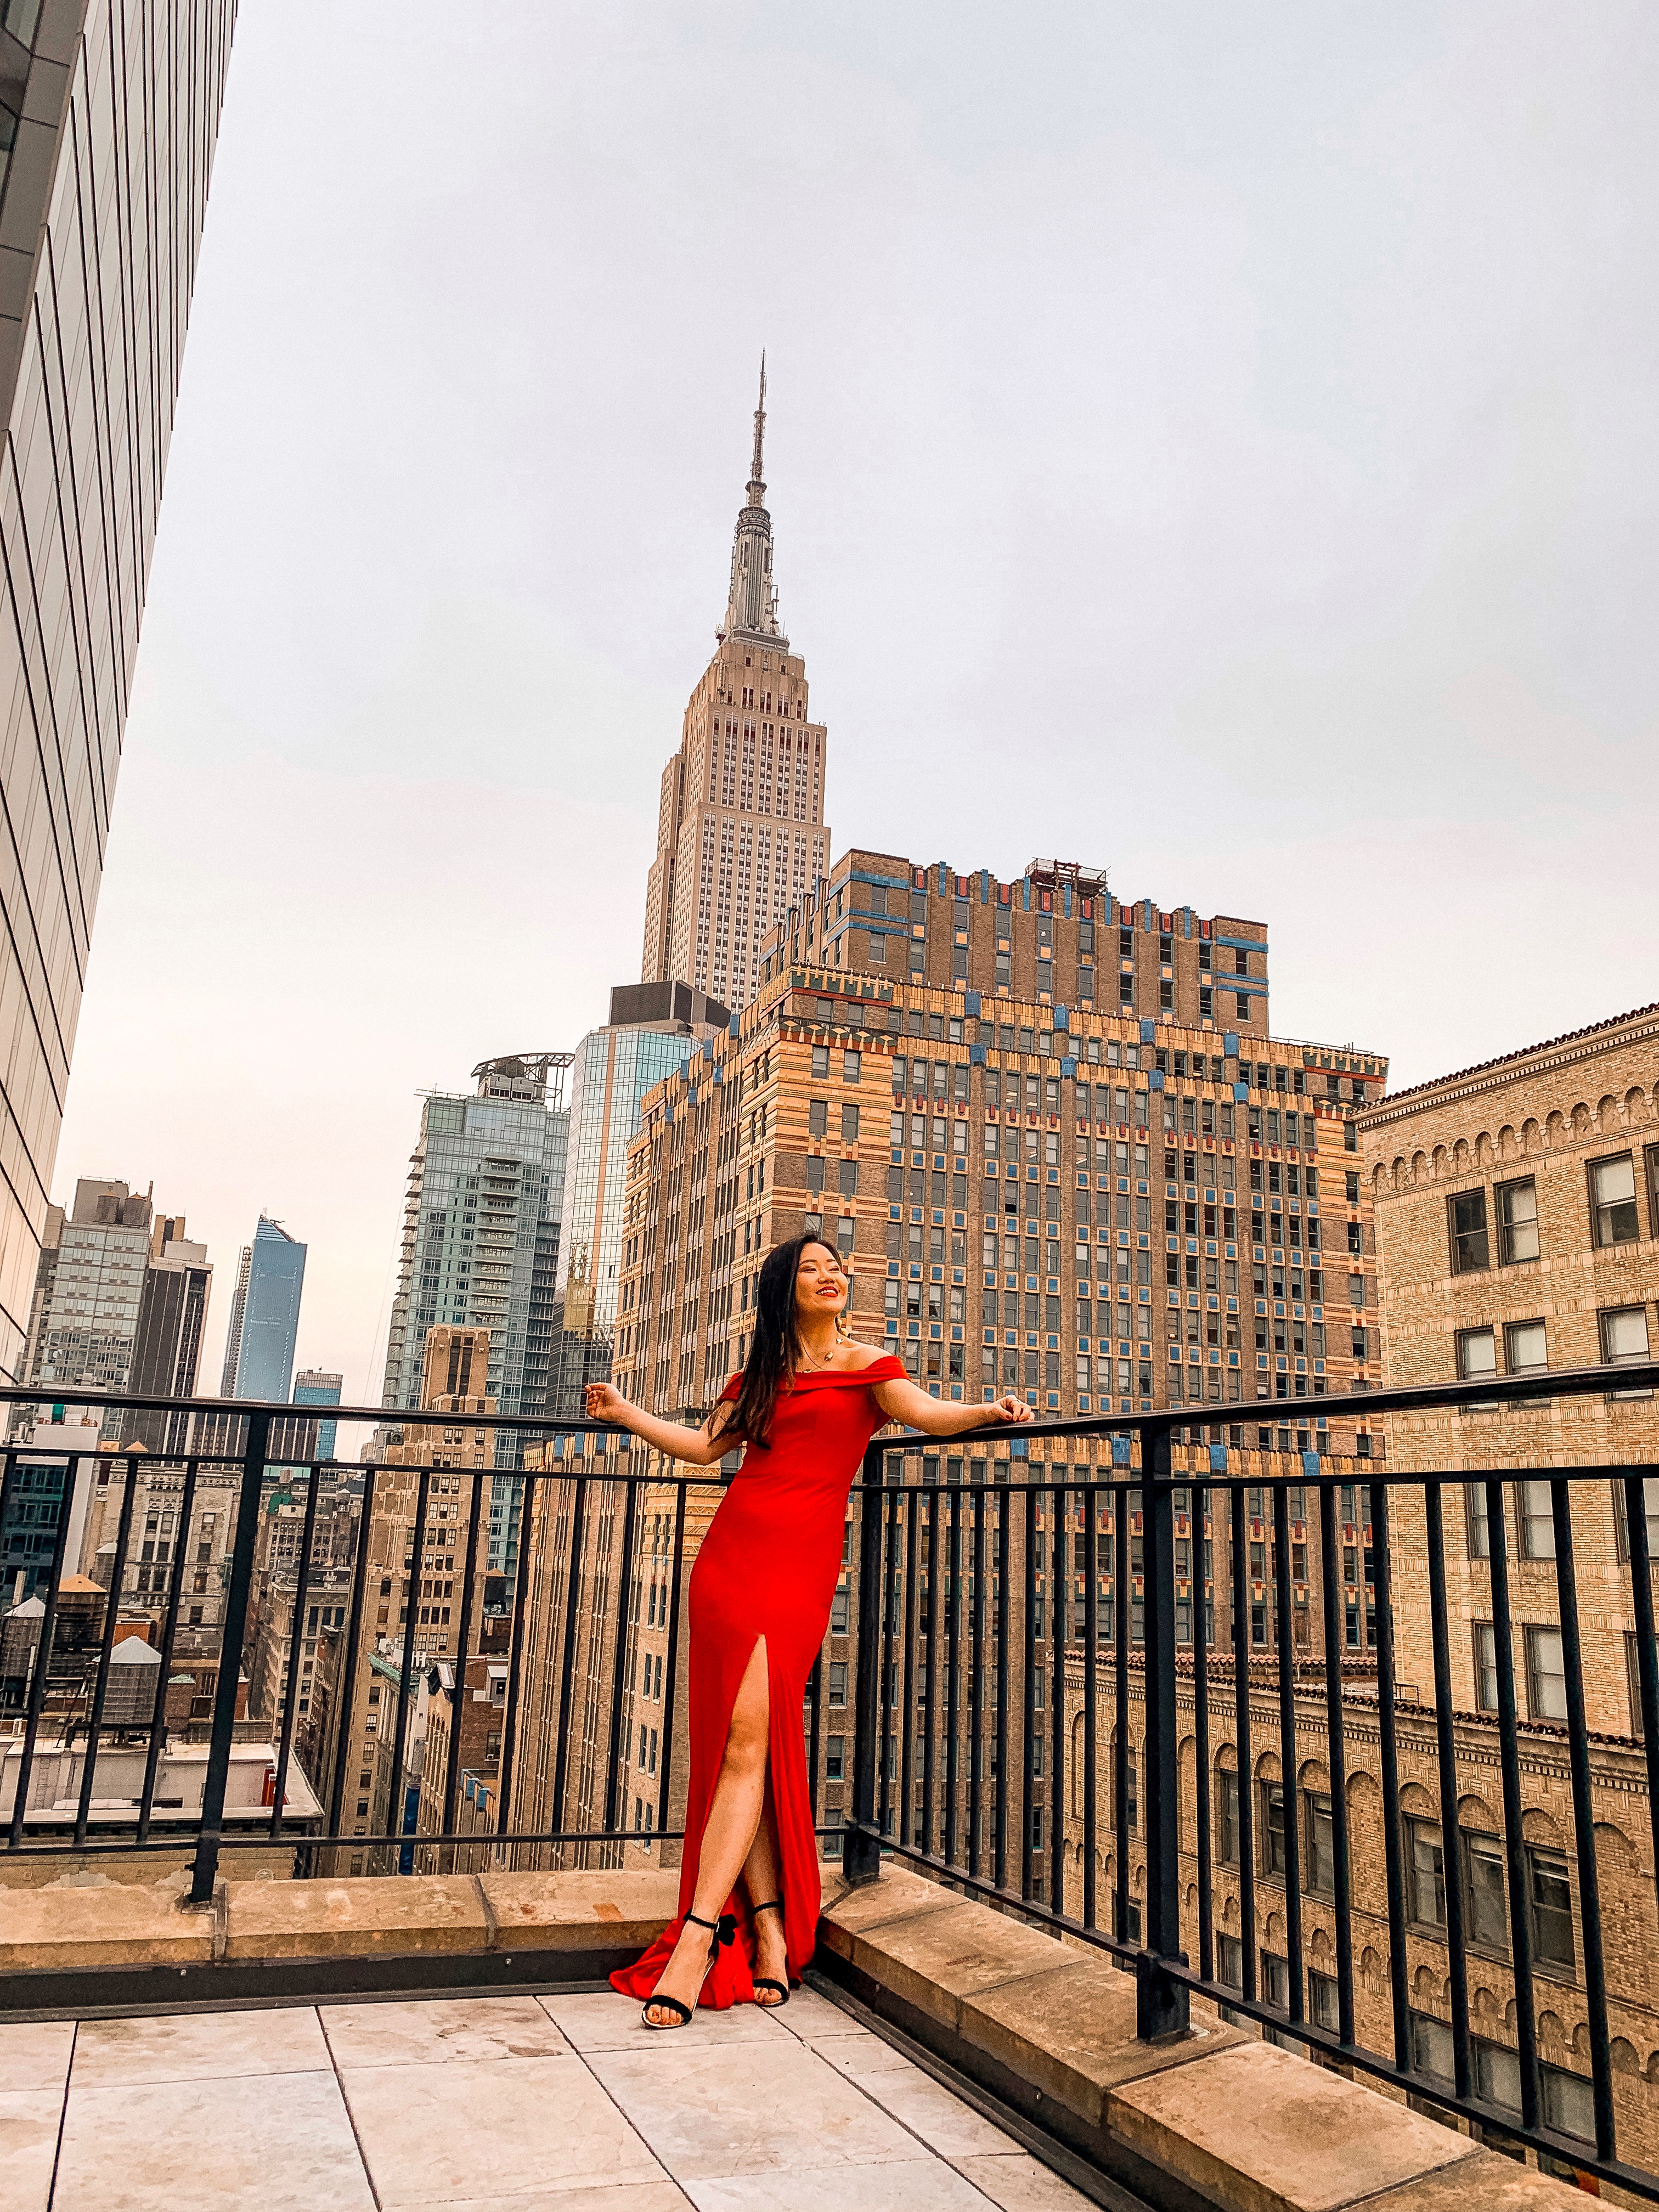 The Best Luxury Department Stores in NYC - The Marmara Park Avenue